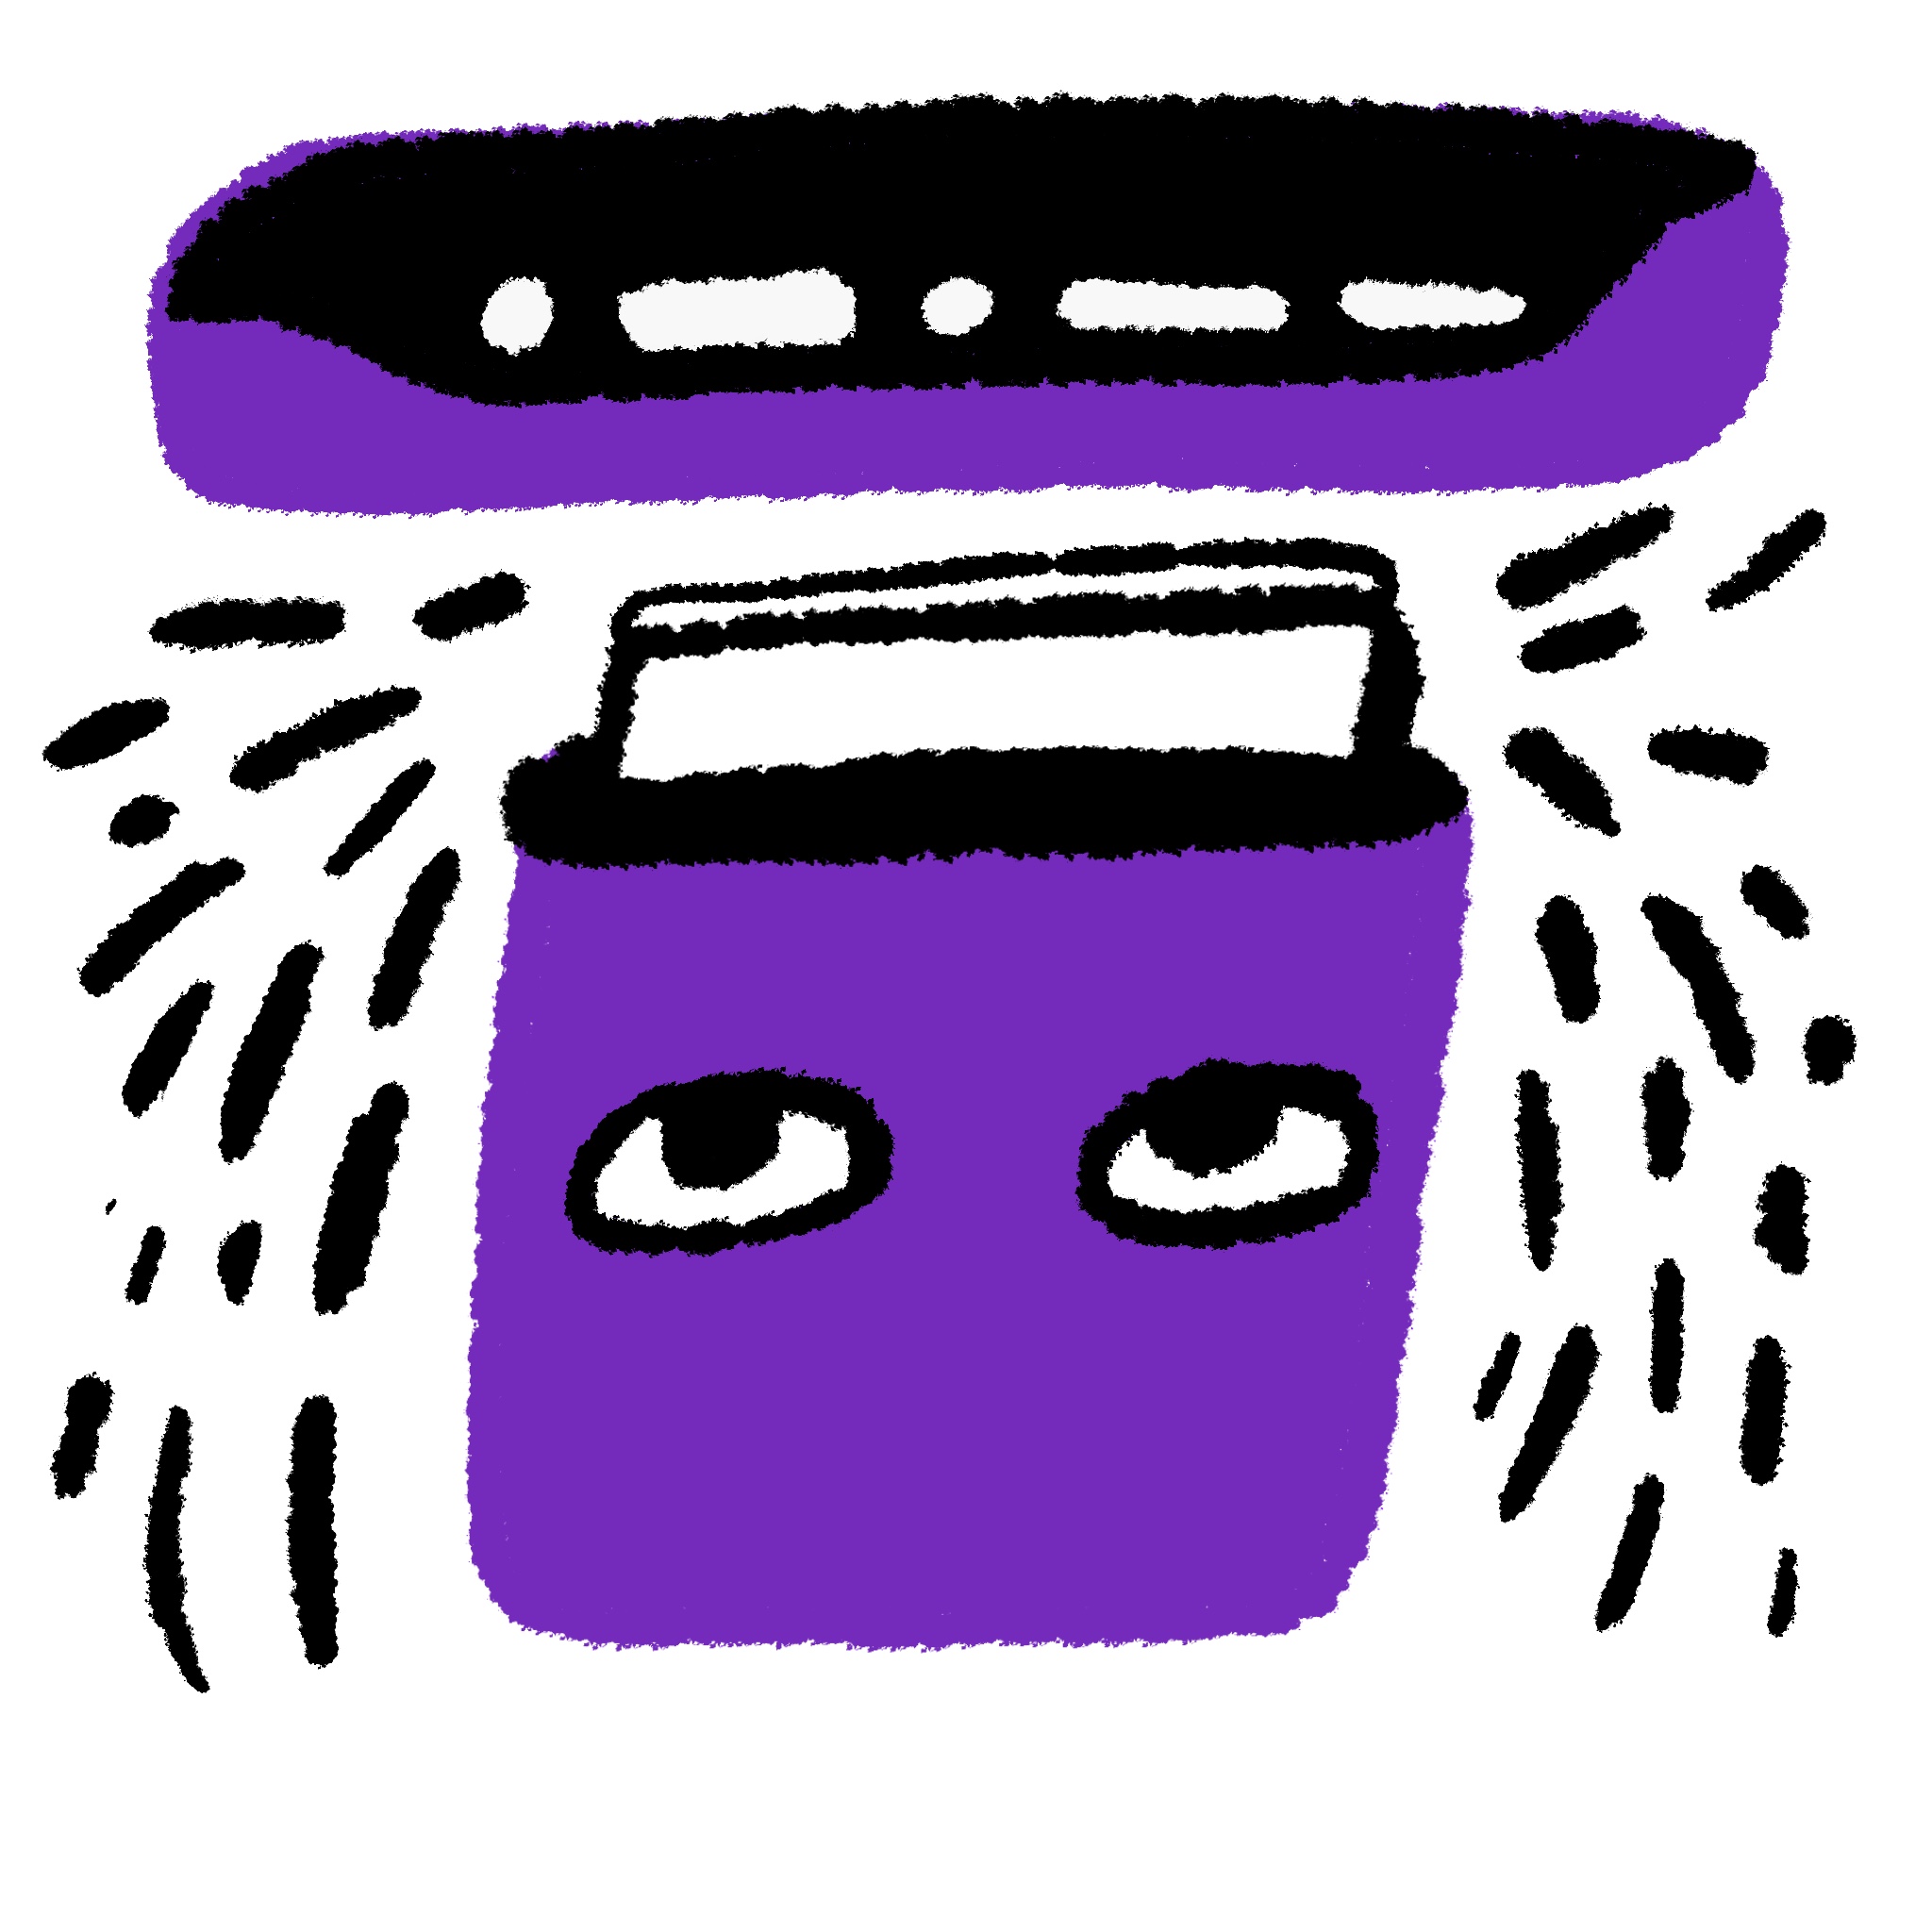 Spot illustration of a purple dongle with eyes